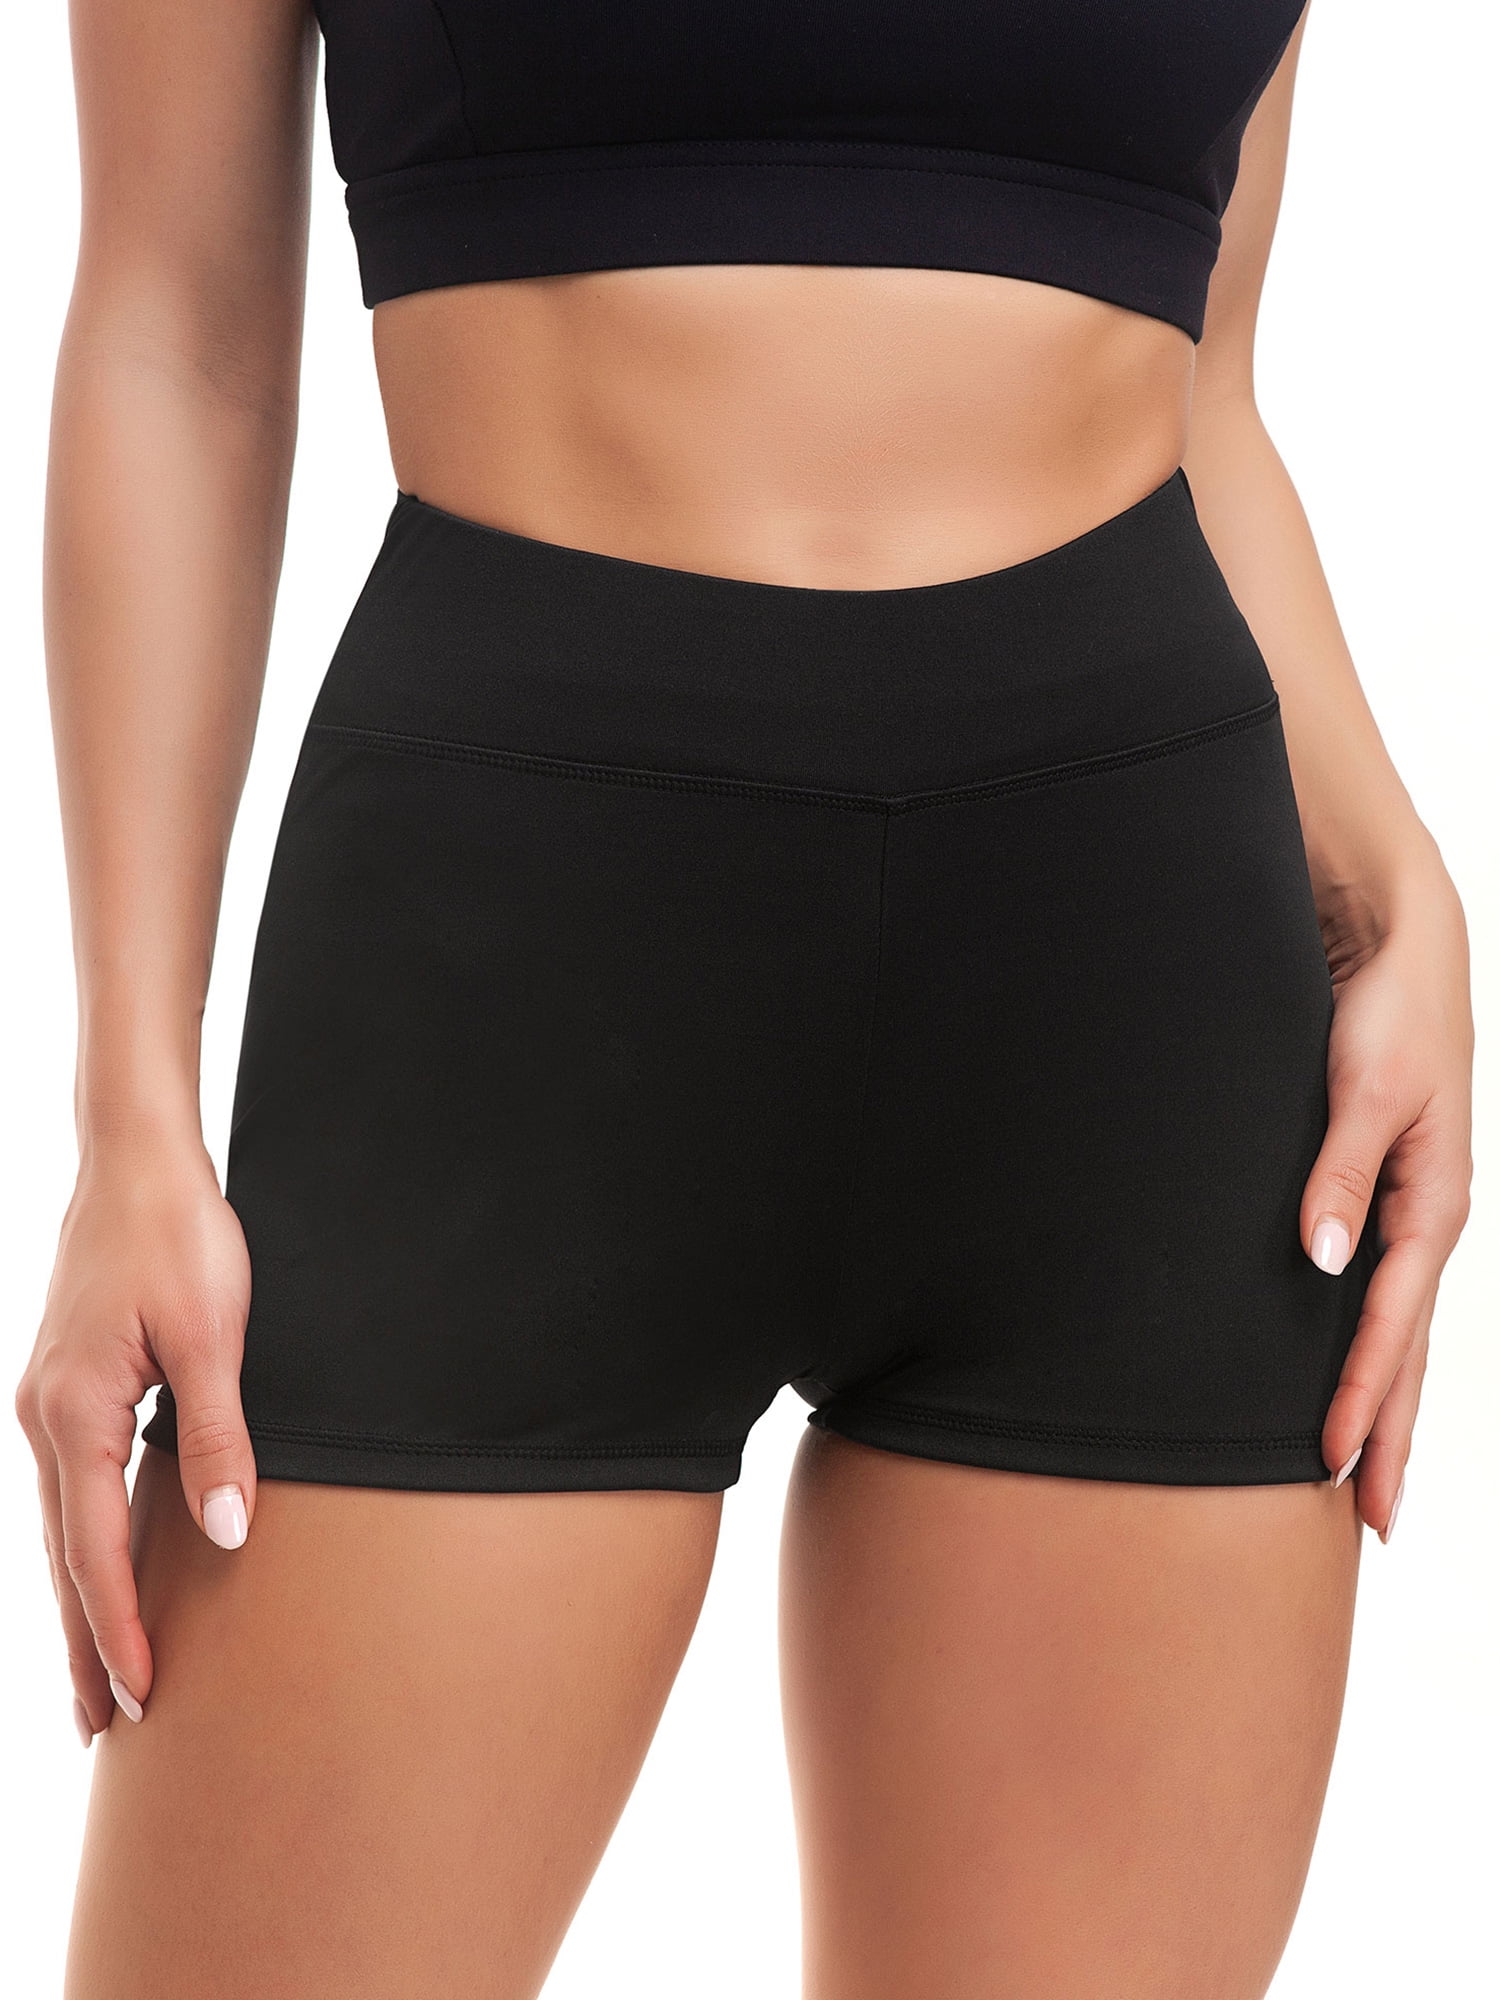 YouLoveIt Women Yoga Short Butt Lifting Shorts Women High Waisted Workout  Gym Yoga Bike Shorts Sexy Stretch Ruched Hot Shorts Casual Pants 